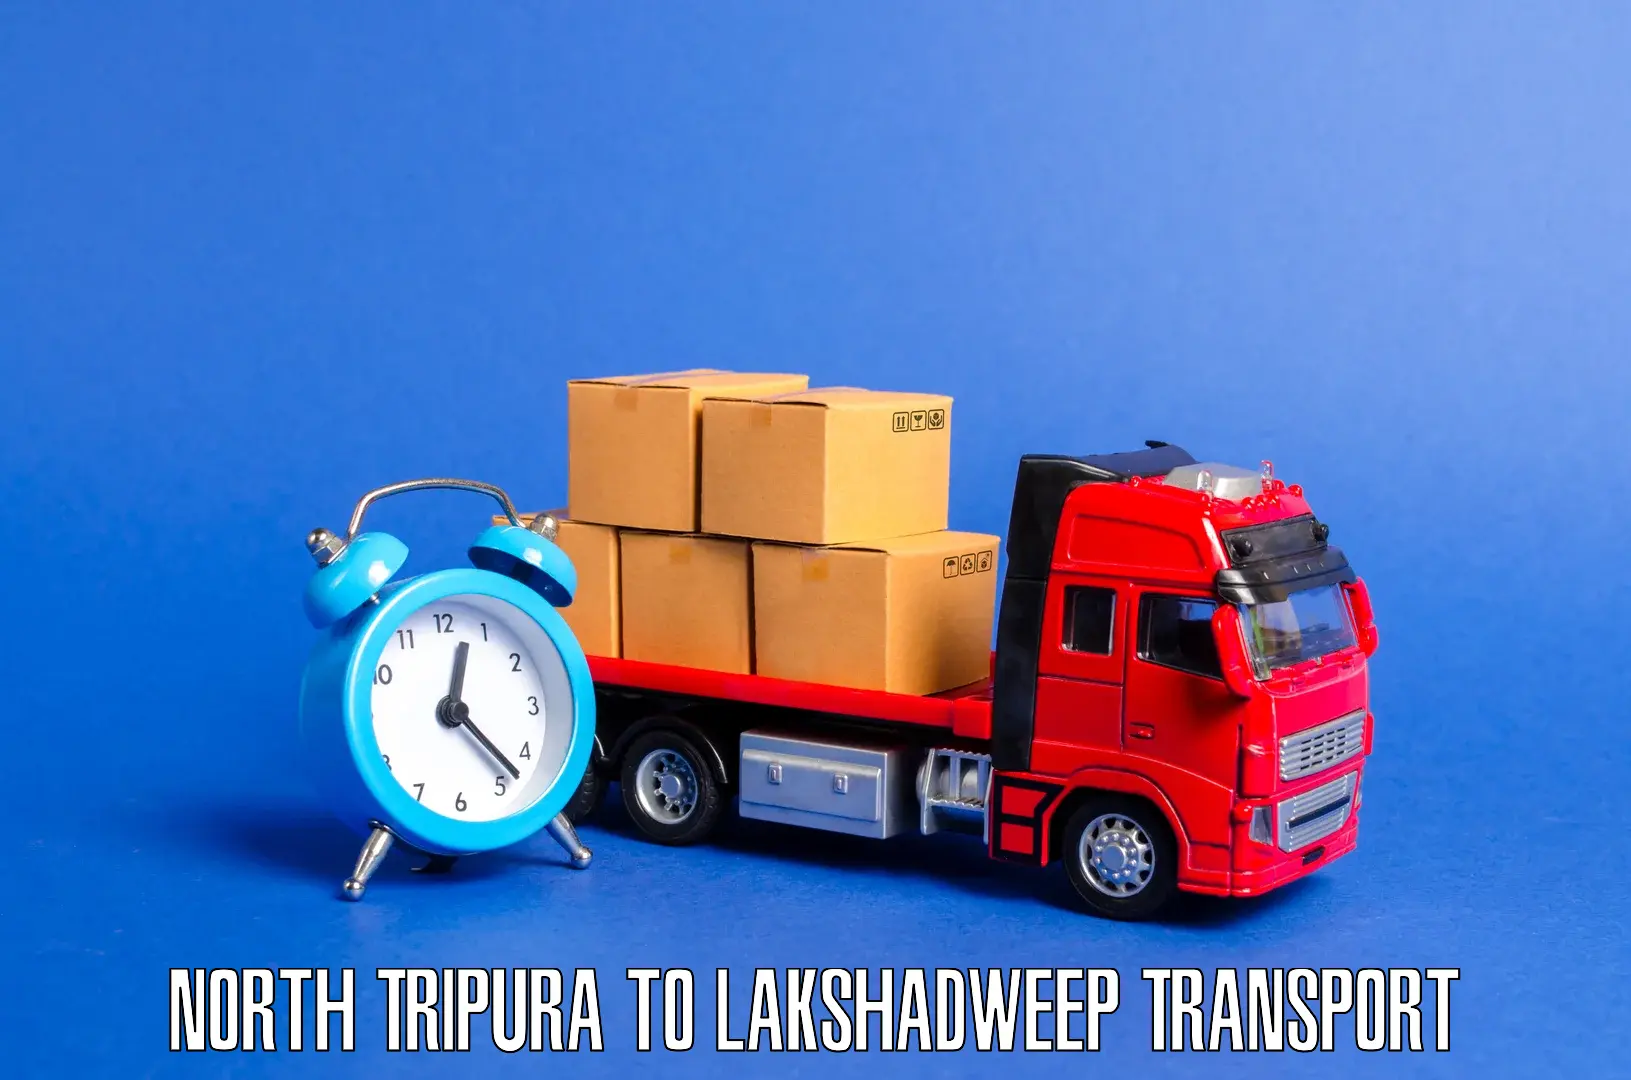 Transport bike from one state to another in North Tripura to Lakshadweep